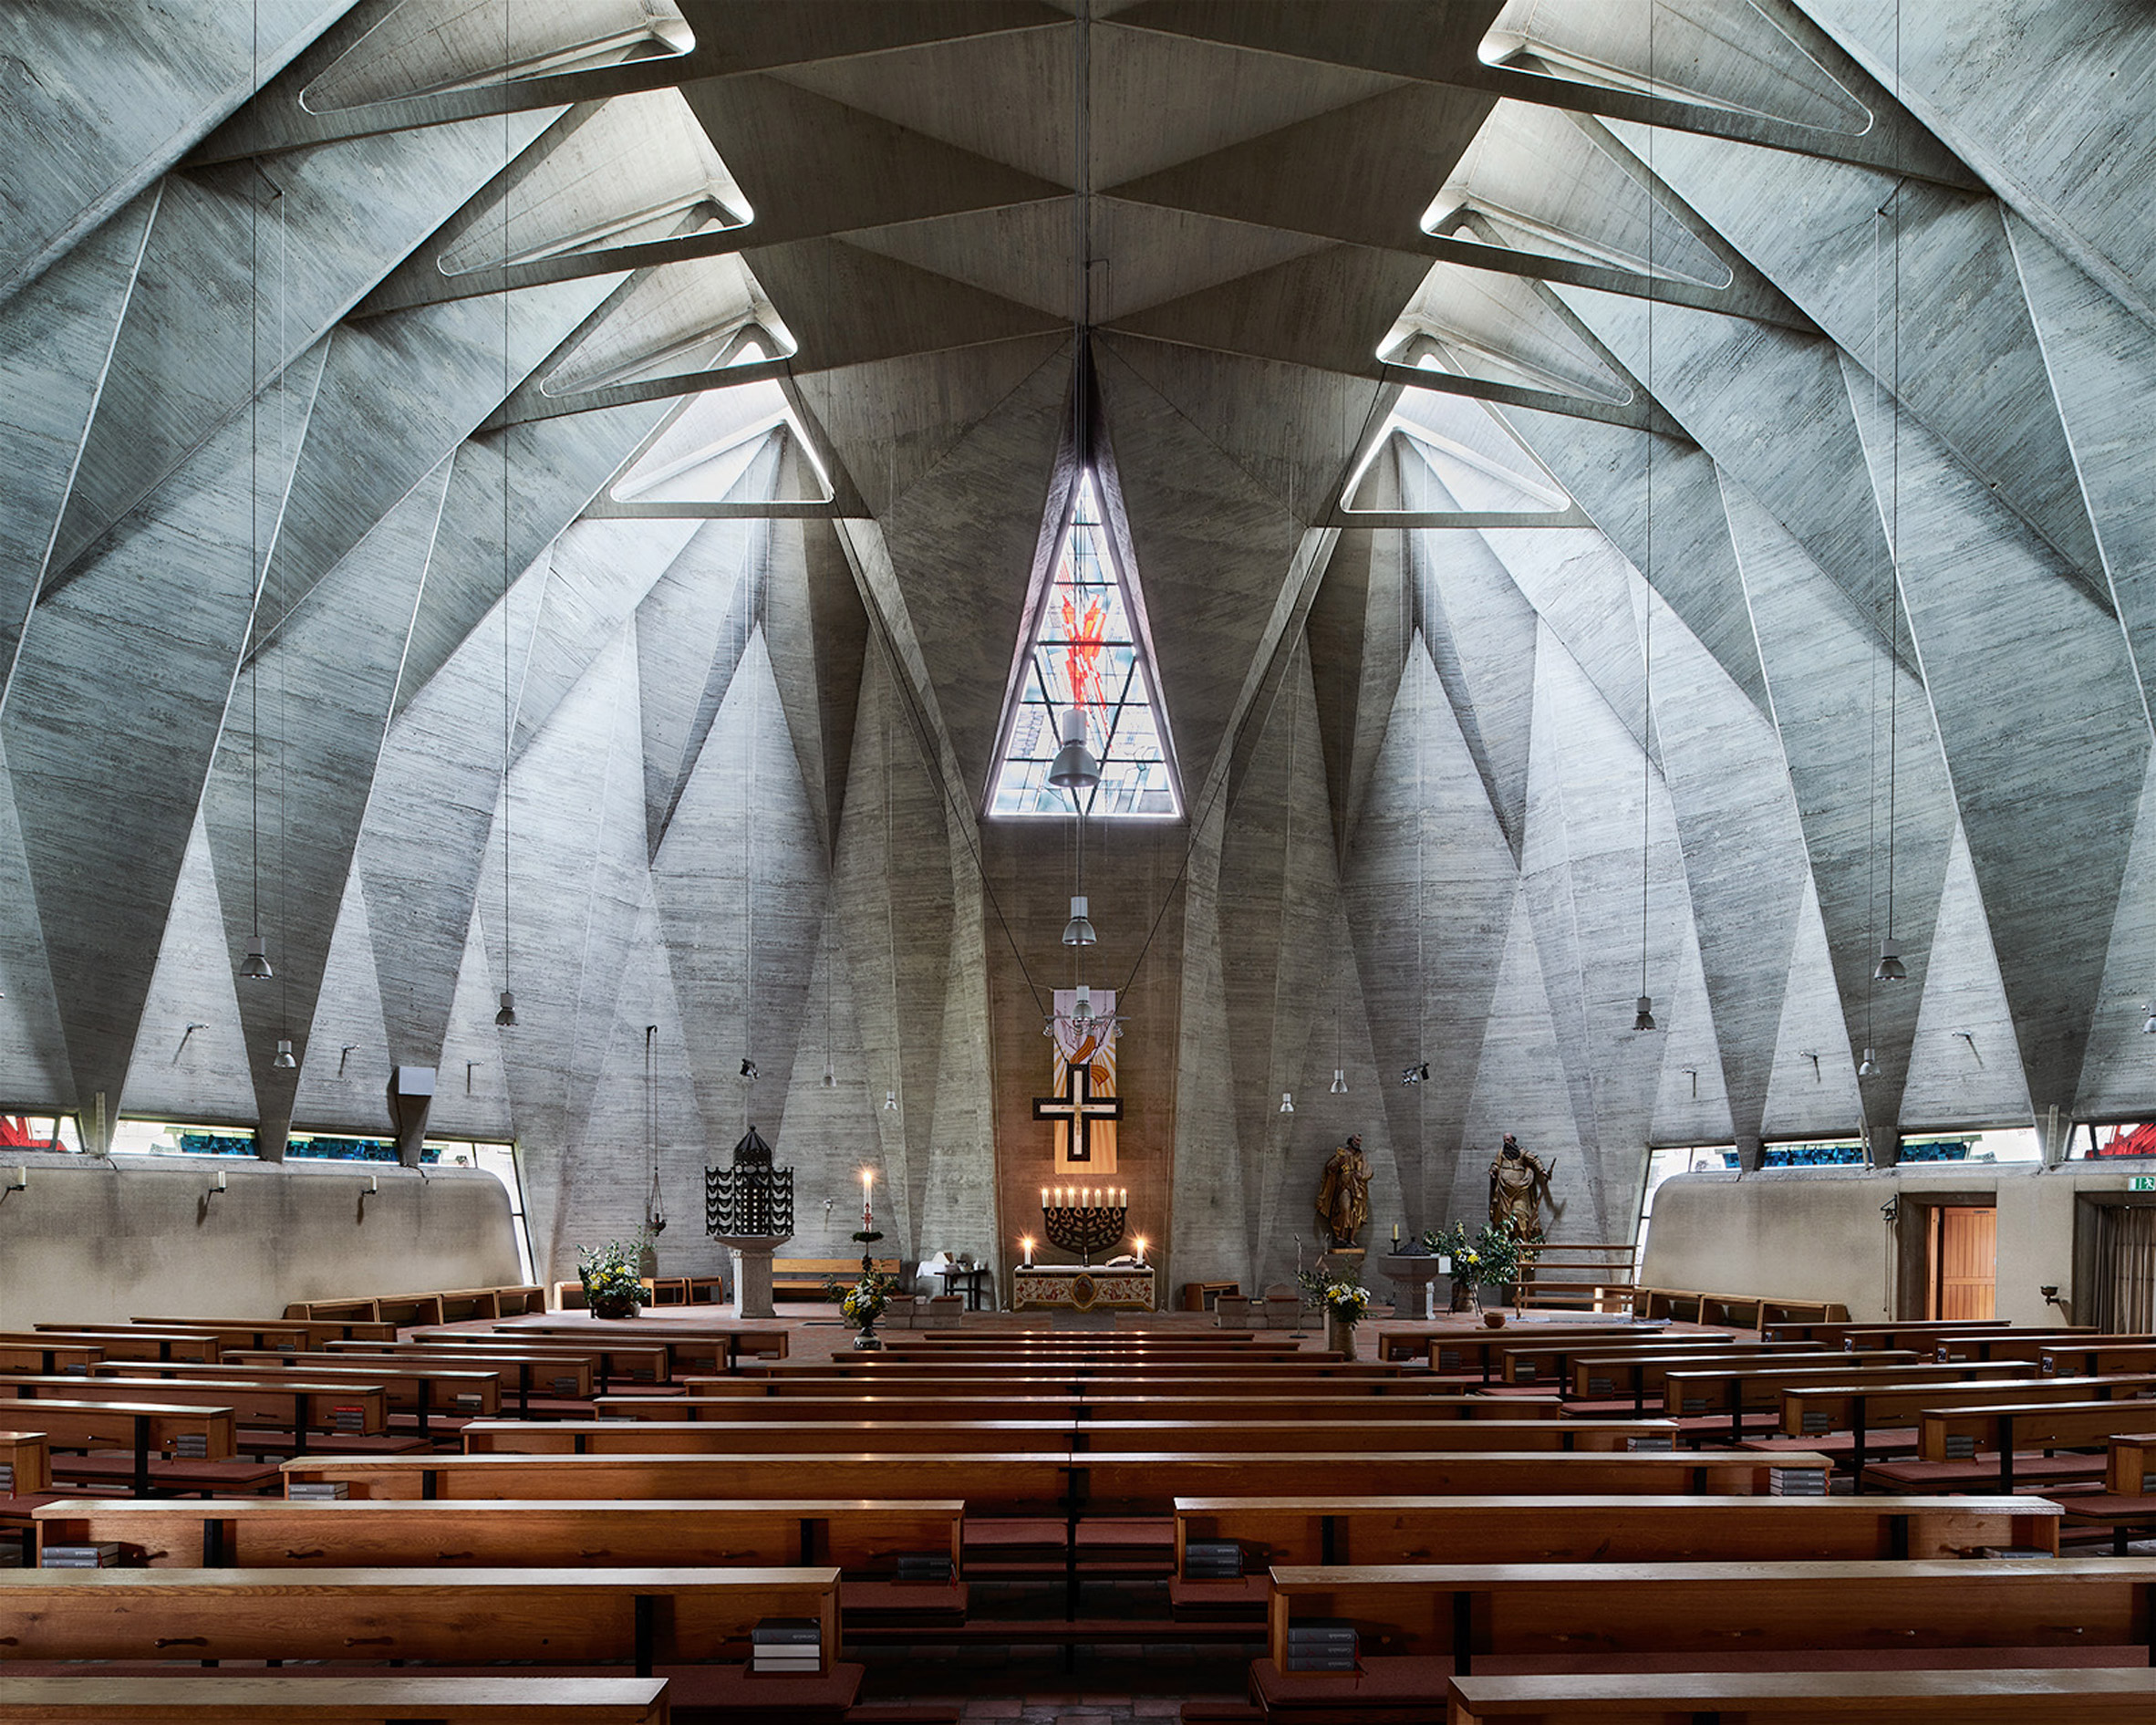 St. Paulus Kirche featured in the Sacred Modernity book